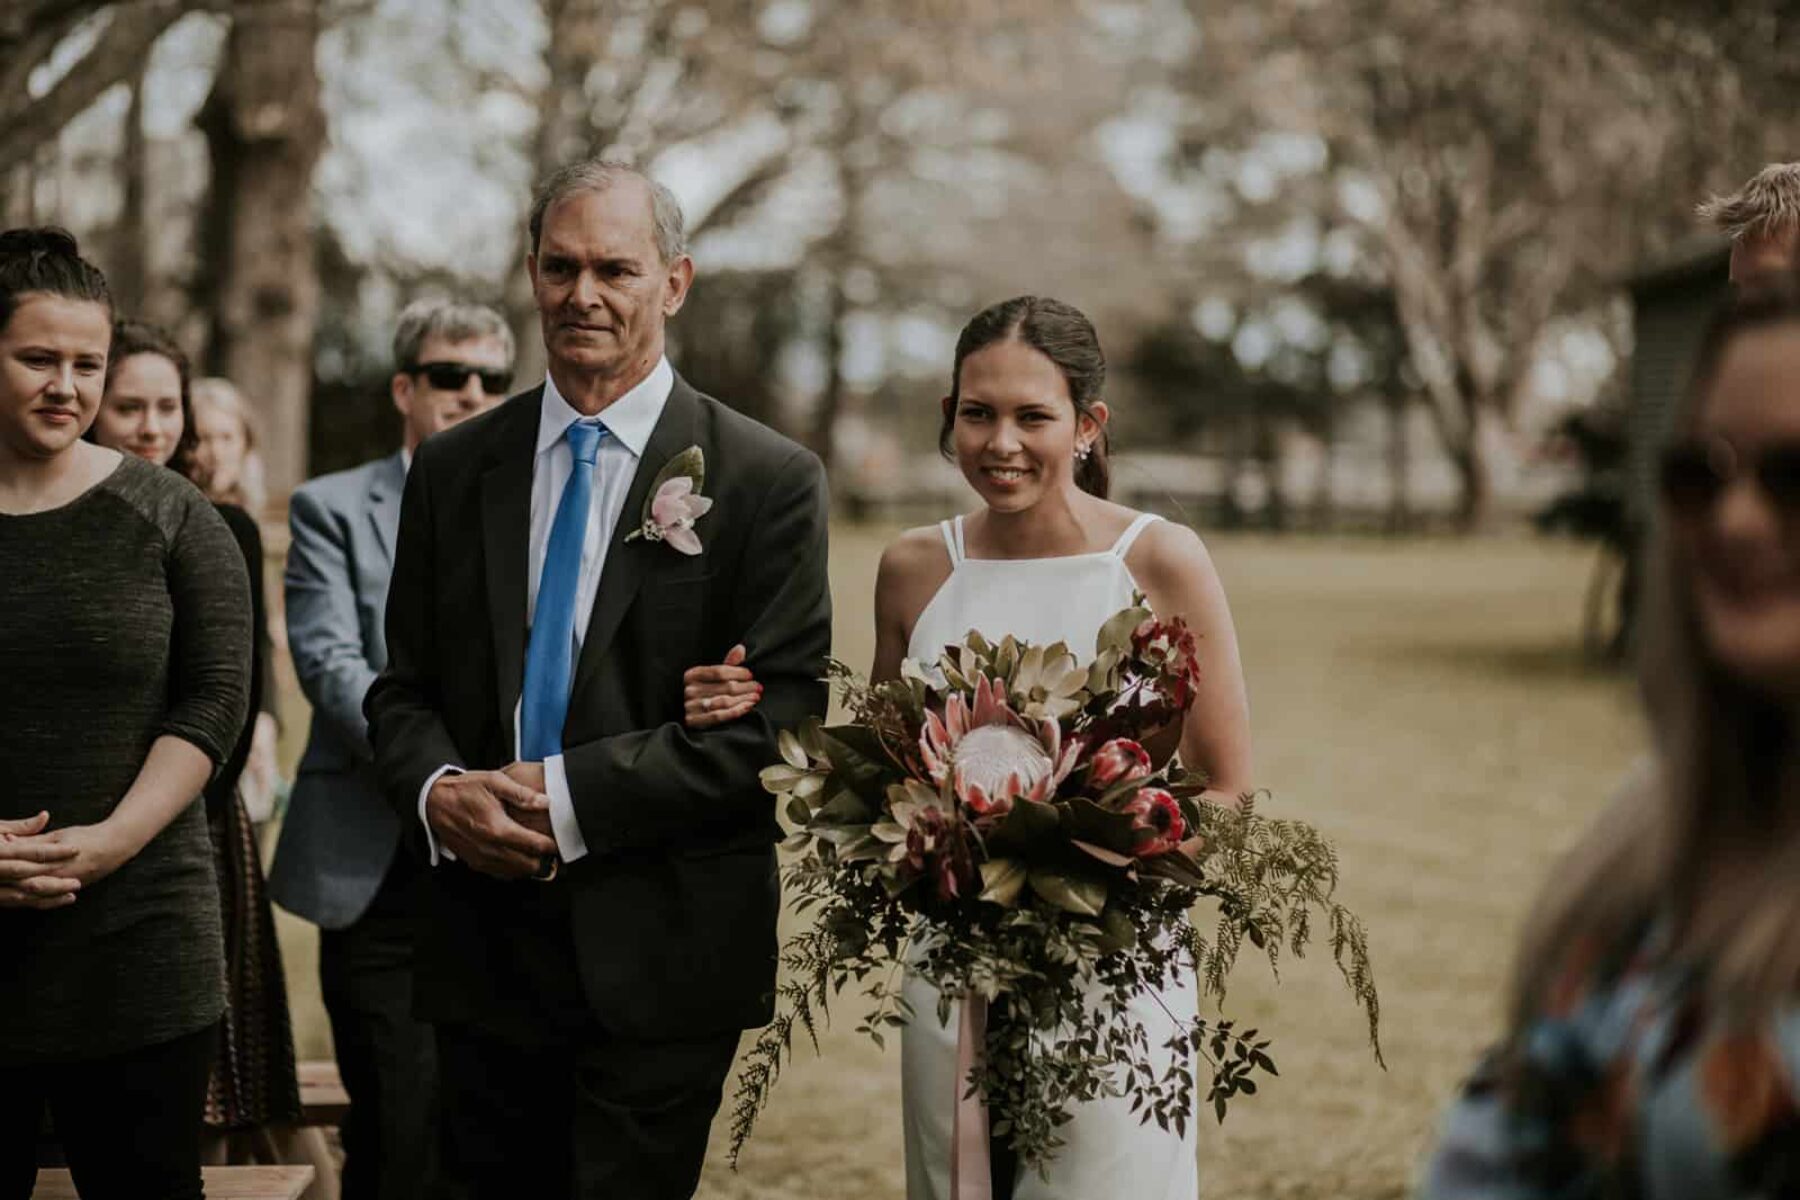 DIY Country wedding in Cambridge NZ - Amy Kate Photography